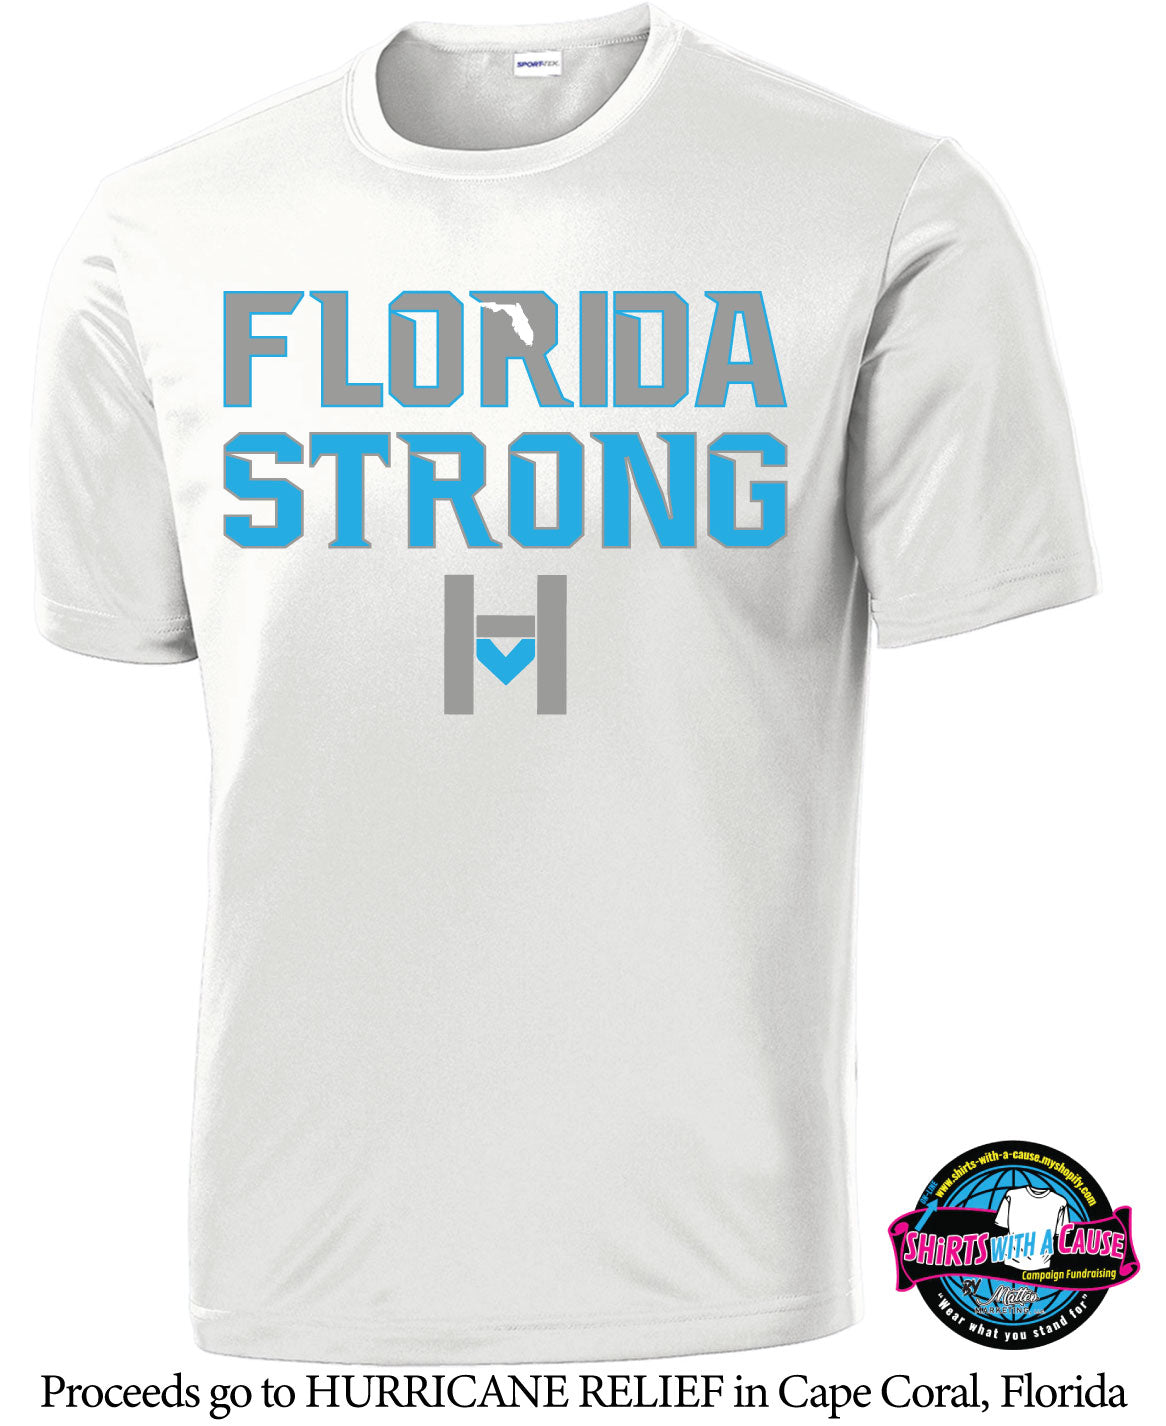 Florida Strong Hoops on Mission